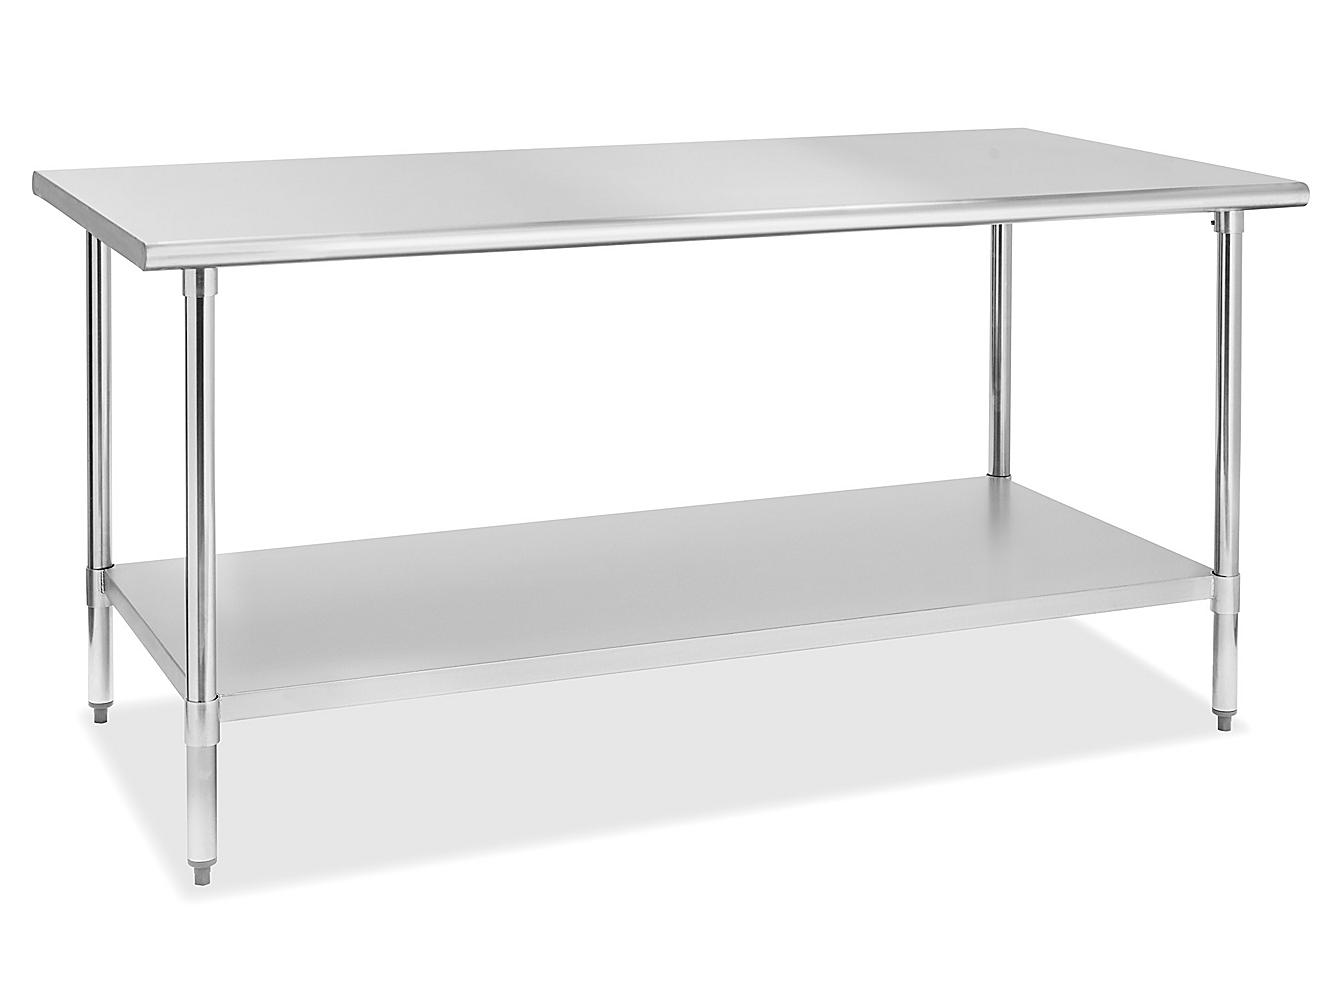 standard-stainless-steel-worktable-with-bottom-shelf-72-x-36-h-7566